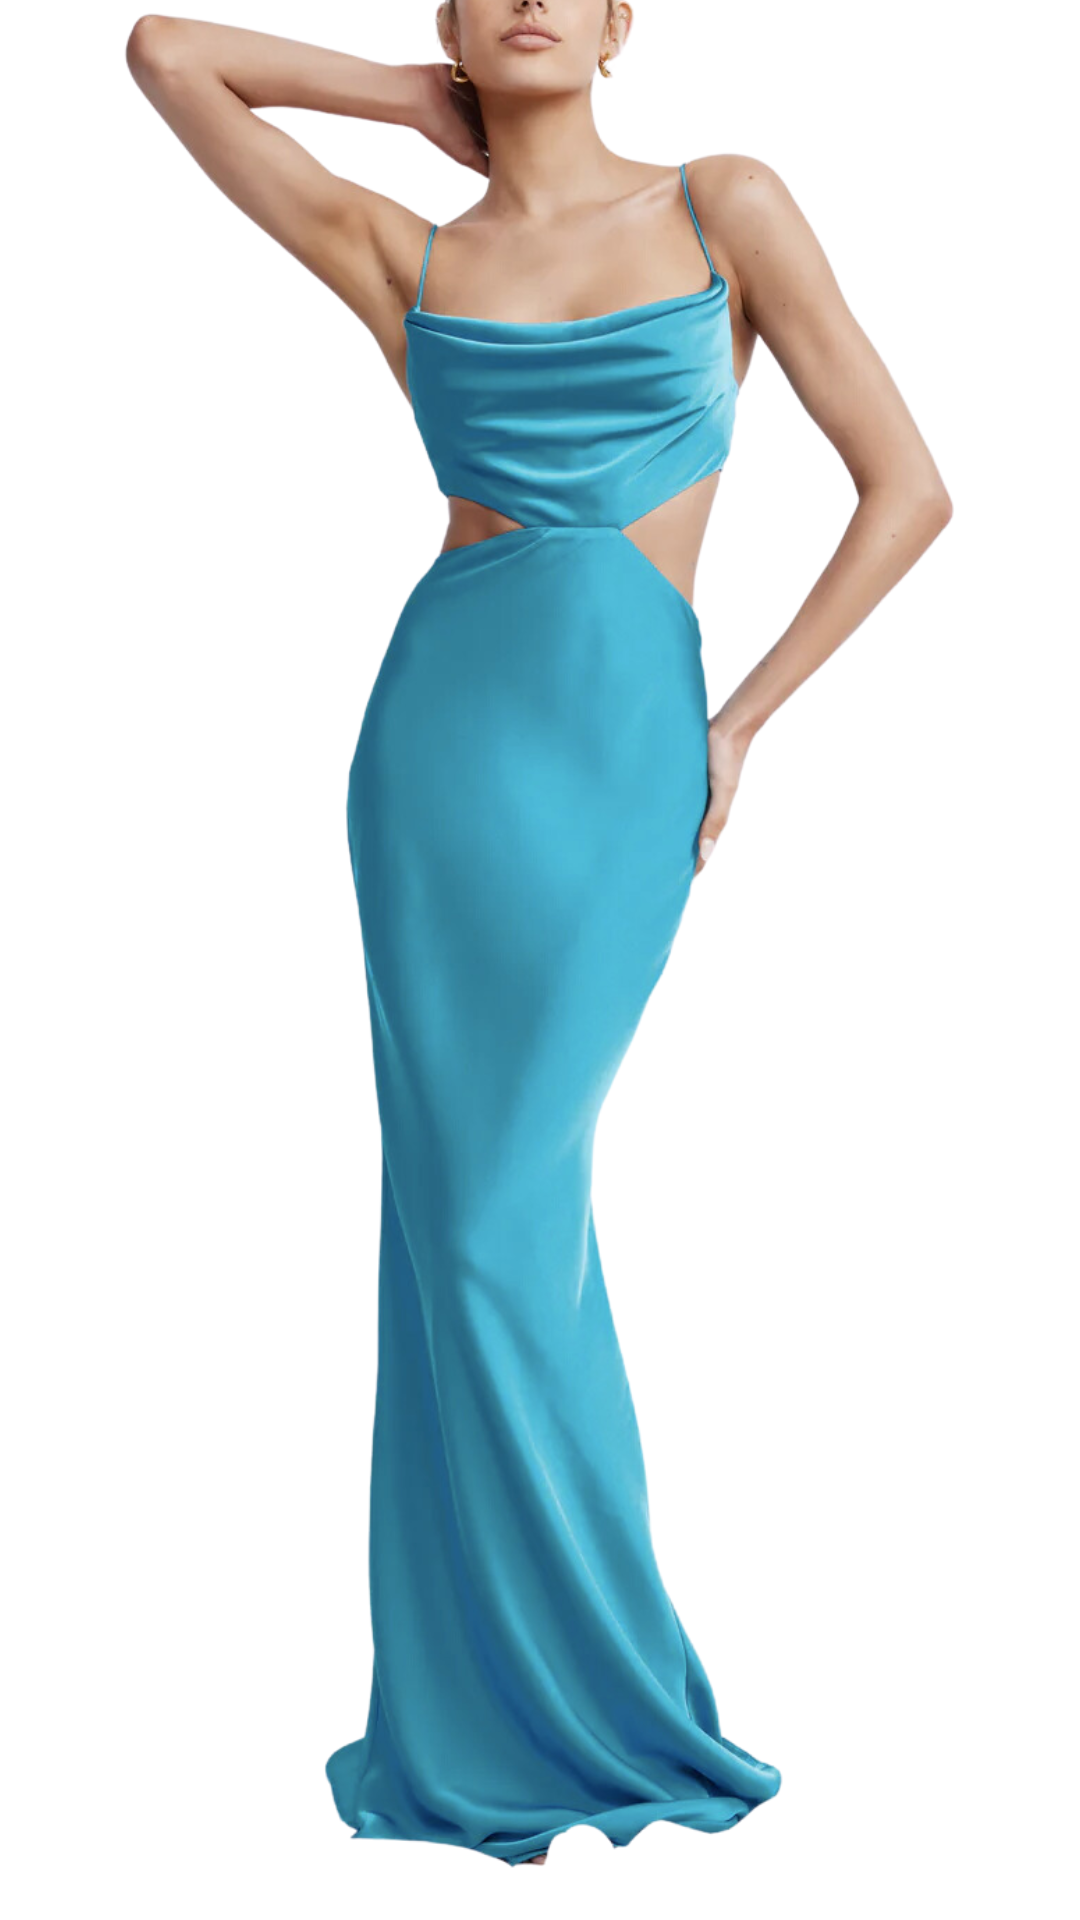 Lexi Celia Cowl Cut-Out Dress in Teal